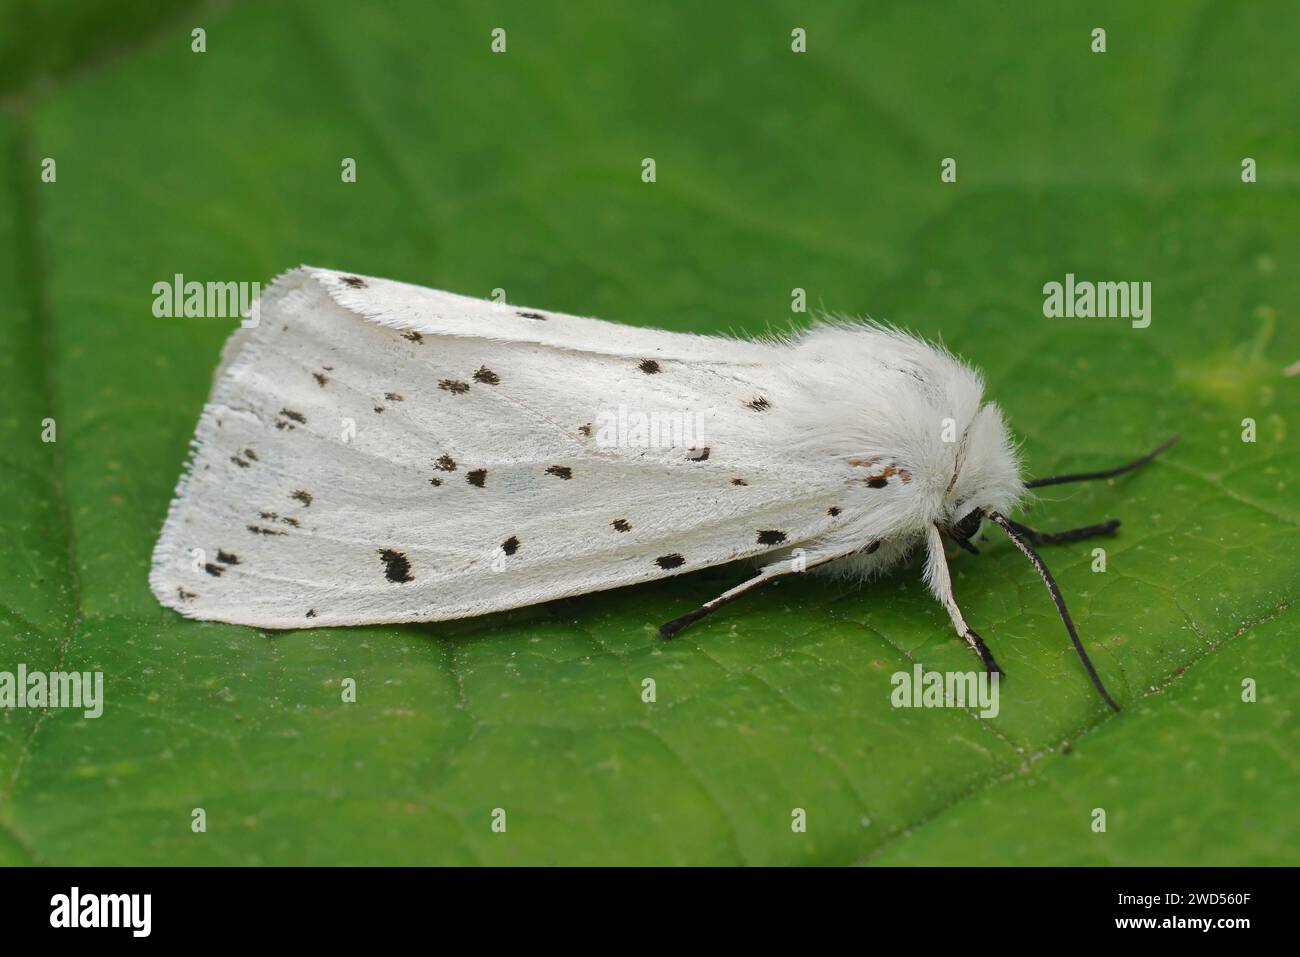 Natural closeup on a white ermine moth, Spilosoma lubricipeda sitting on a green leaf in the garden Stock Photo